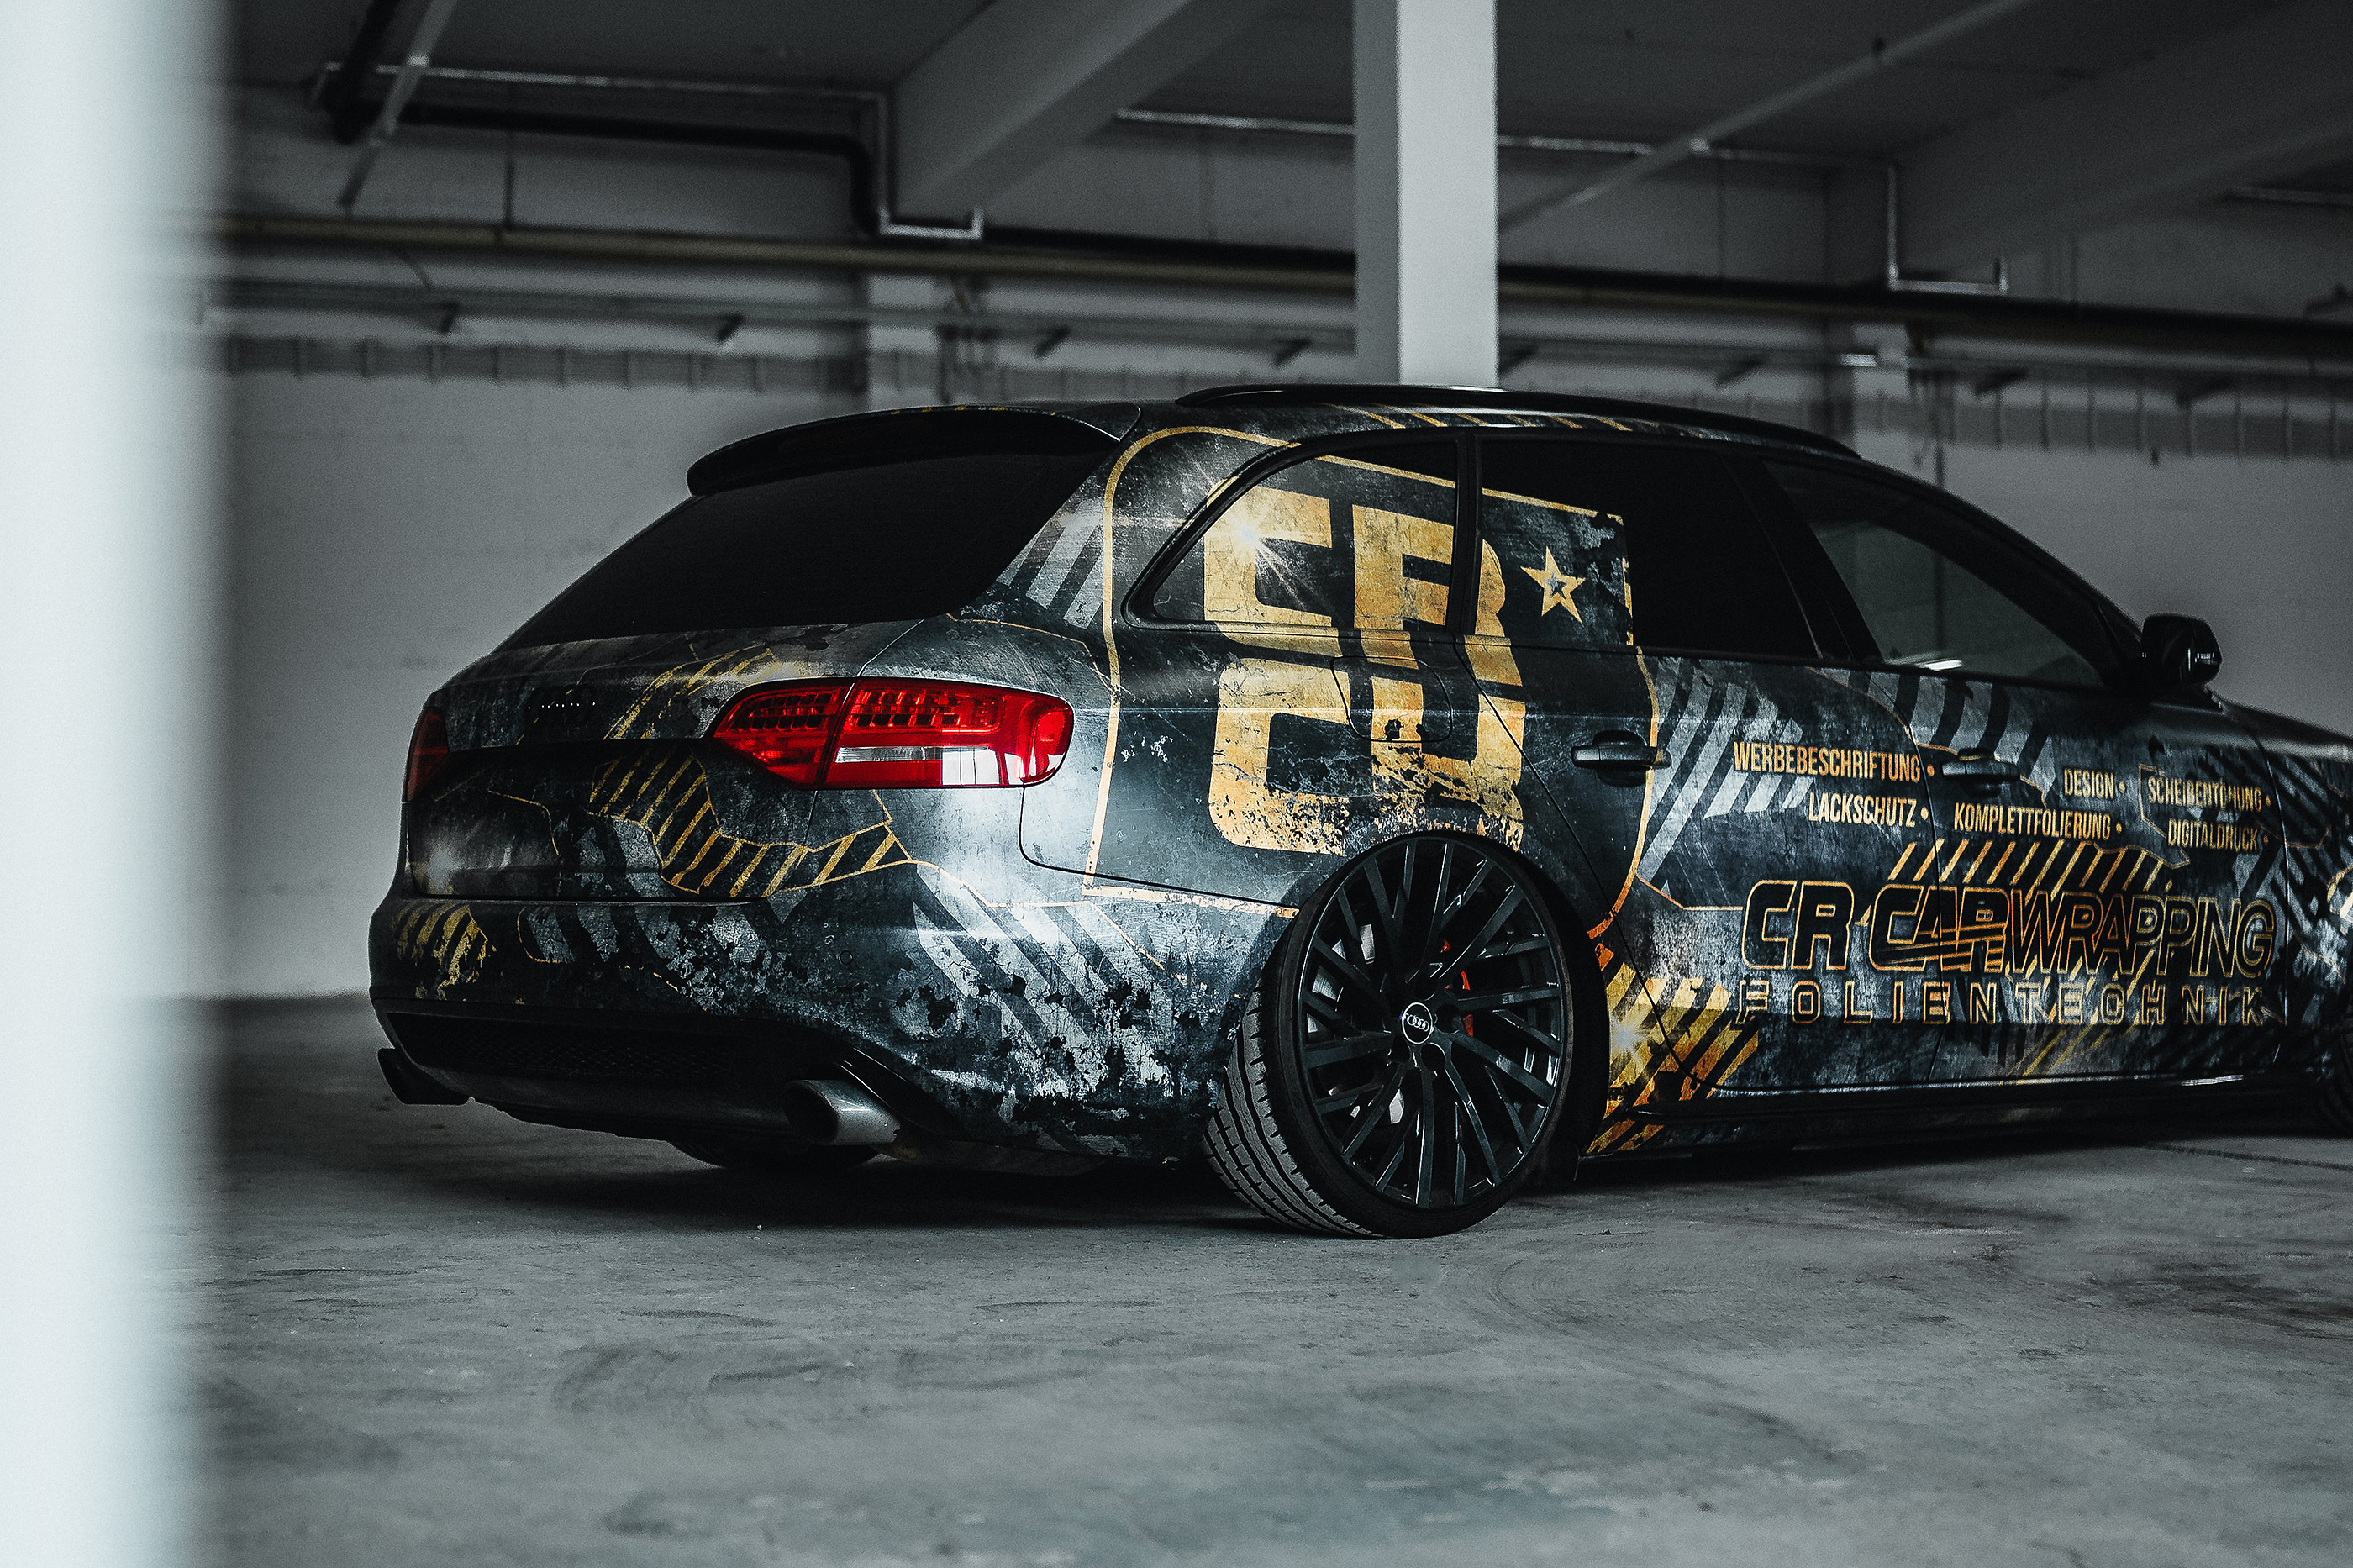 💥 Audi A4 CRCarwrapping 💥